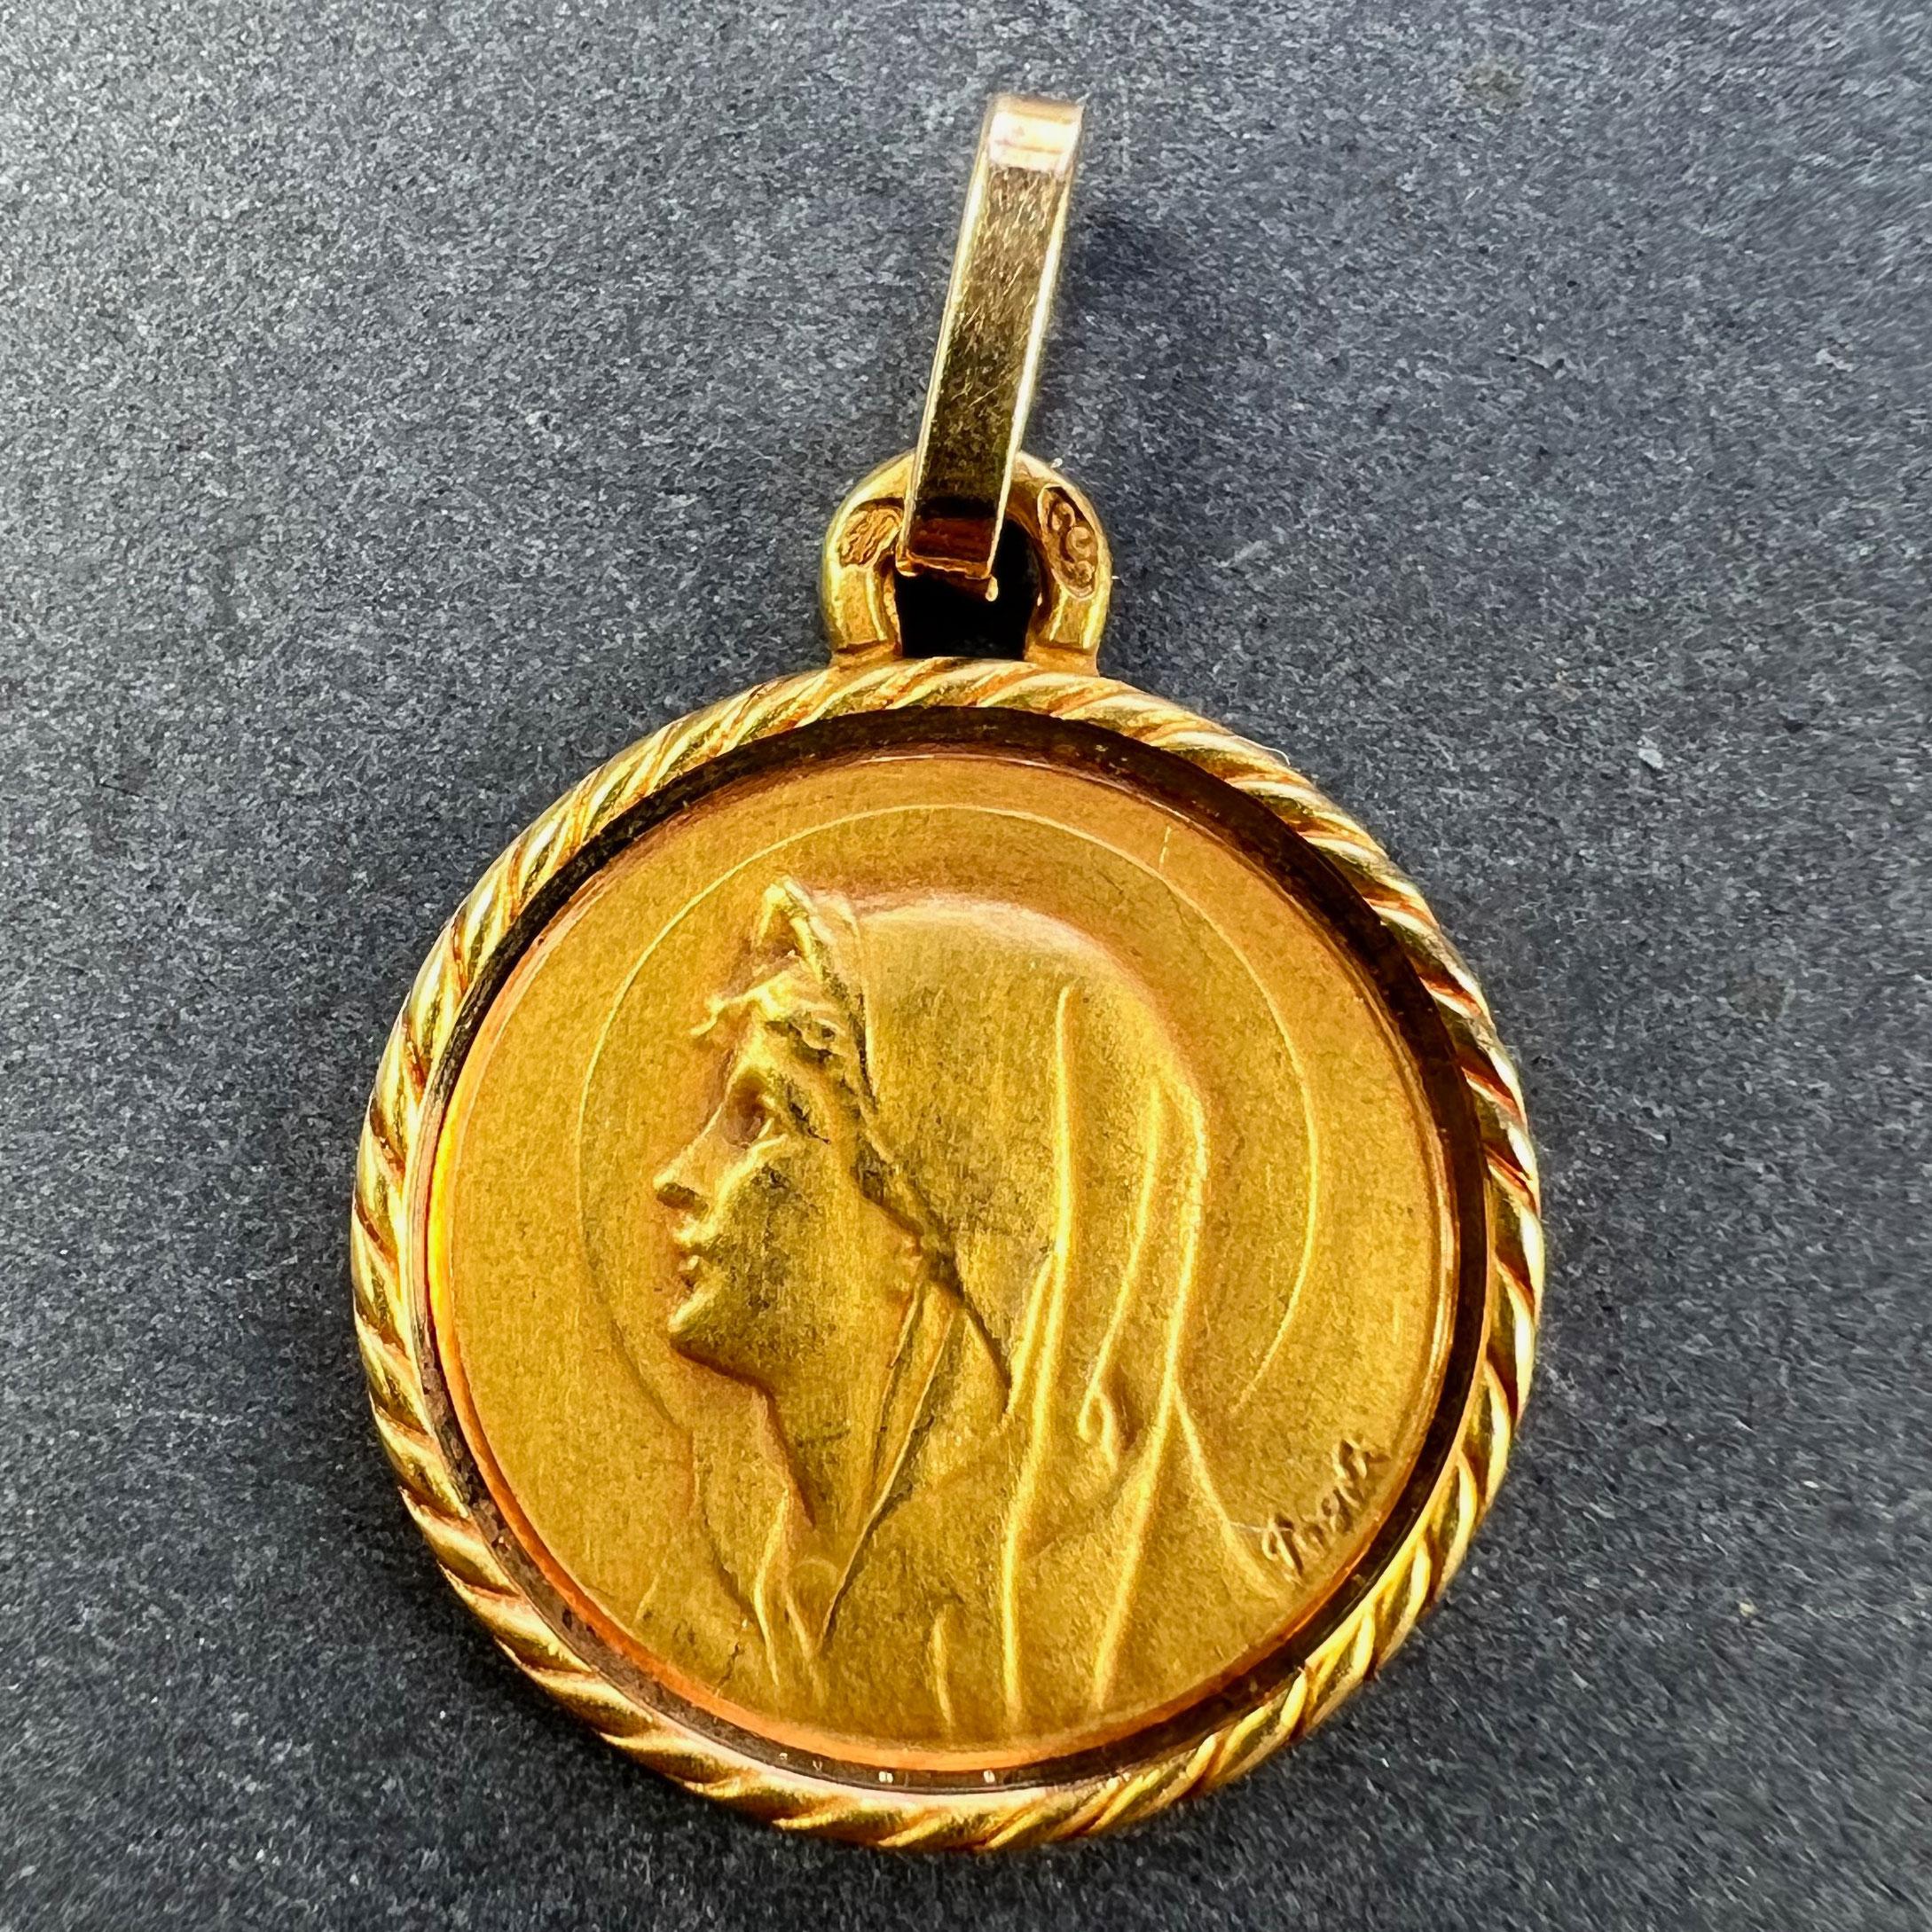 A French 18 karat (18K) yellow gold charm pendant designed as a medal depicting the Virgin Mary with a halo and a rope twist border. Signed Pagdi, stamped with the eagle mark for 18 karat gold and French manufacture with maker's mark for Perroud.